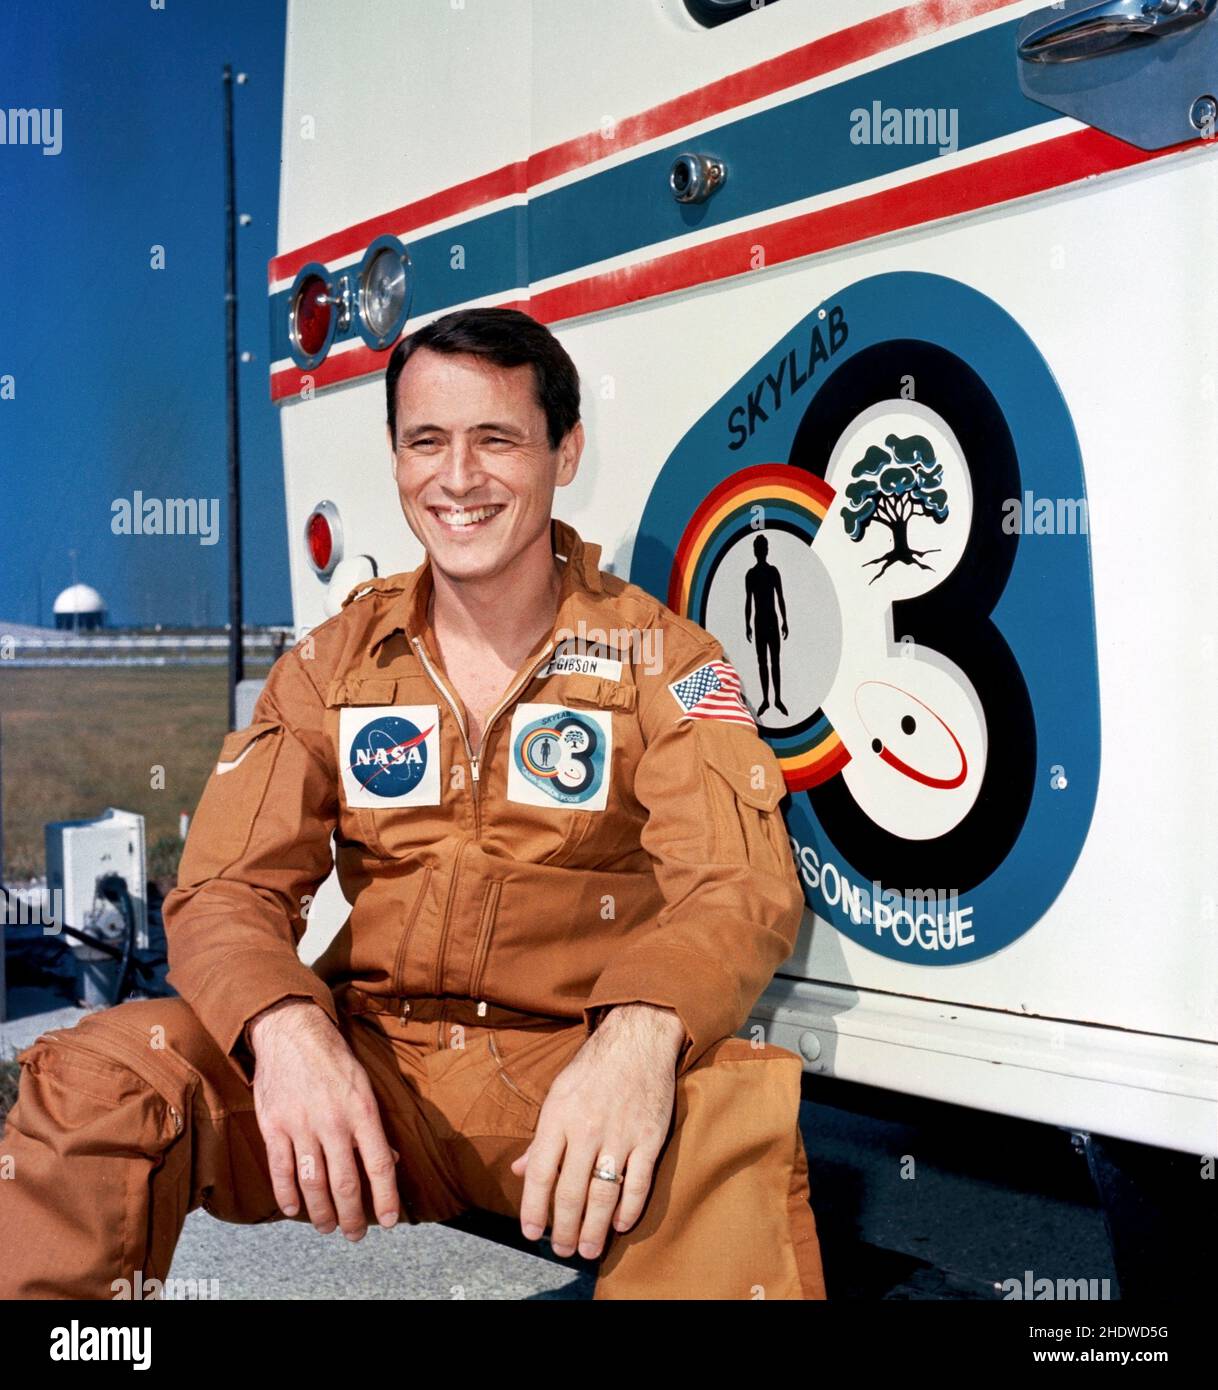 (8 Nov. 1973) --- Scientist-astronaut Edward G. Gibson, Skylab 4 science pilot, relaxes on the running board of the transfer van during a visit to the Skylab 4/Saturn 1B space vehicle at Pad B, Launch Complex 39, Kennedy Space Center, Florida. On the morning of the launch the transfer van will transport astronauts Gibson; Gerald P. Carr, commander; and William R. Pogue, pilot, from the suiting building to Pad B. Skylab 4, the third and last visit to the Skylab space station in Earth orbit, will return additional information on the Earth and sun, as well as provide a favorable location from whi Stock Photo